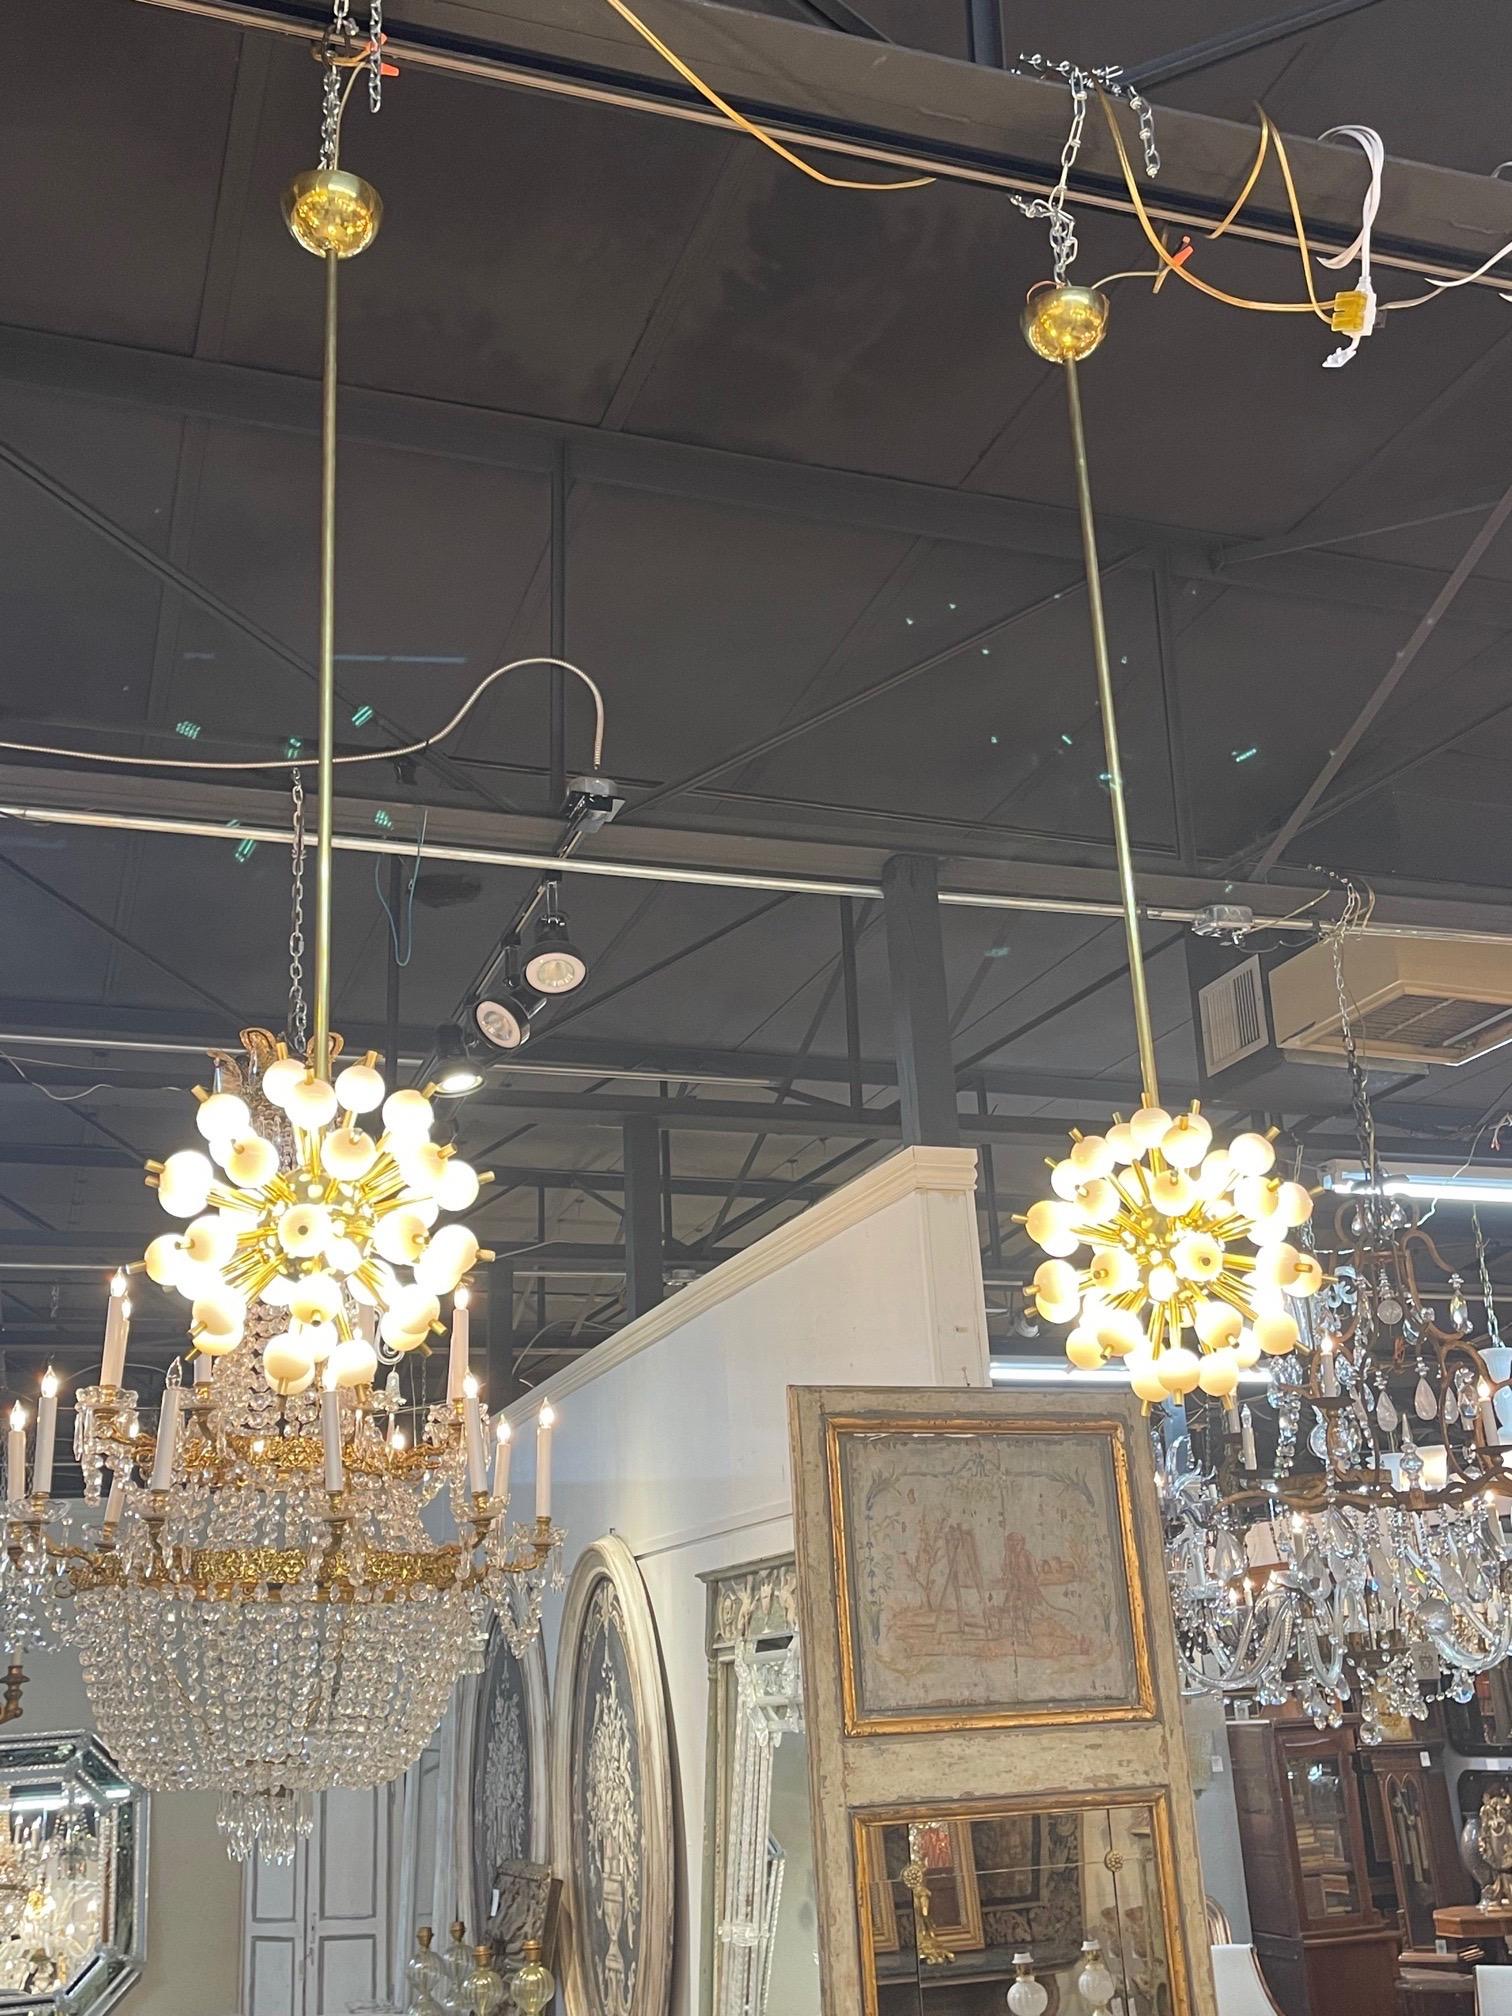 Stylish pair of vintage Italian small scale brass and glass sputnik pendant lights. Very fine quality and great for a modern look. Better hurry...these will go fast! Note price listed is for 1.